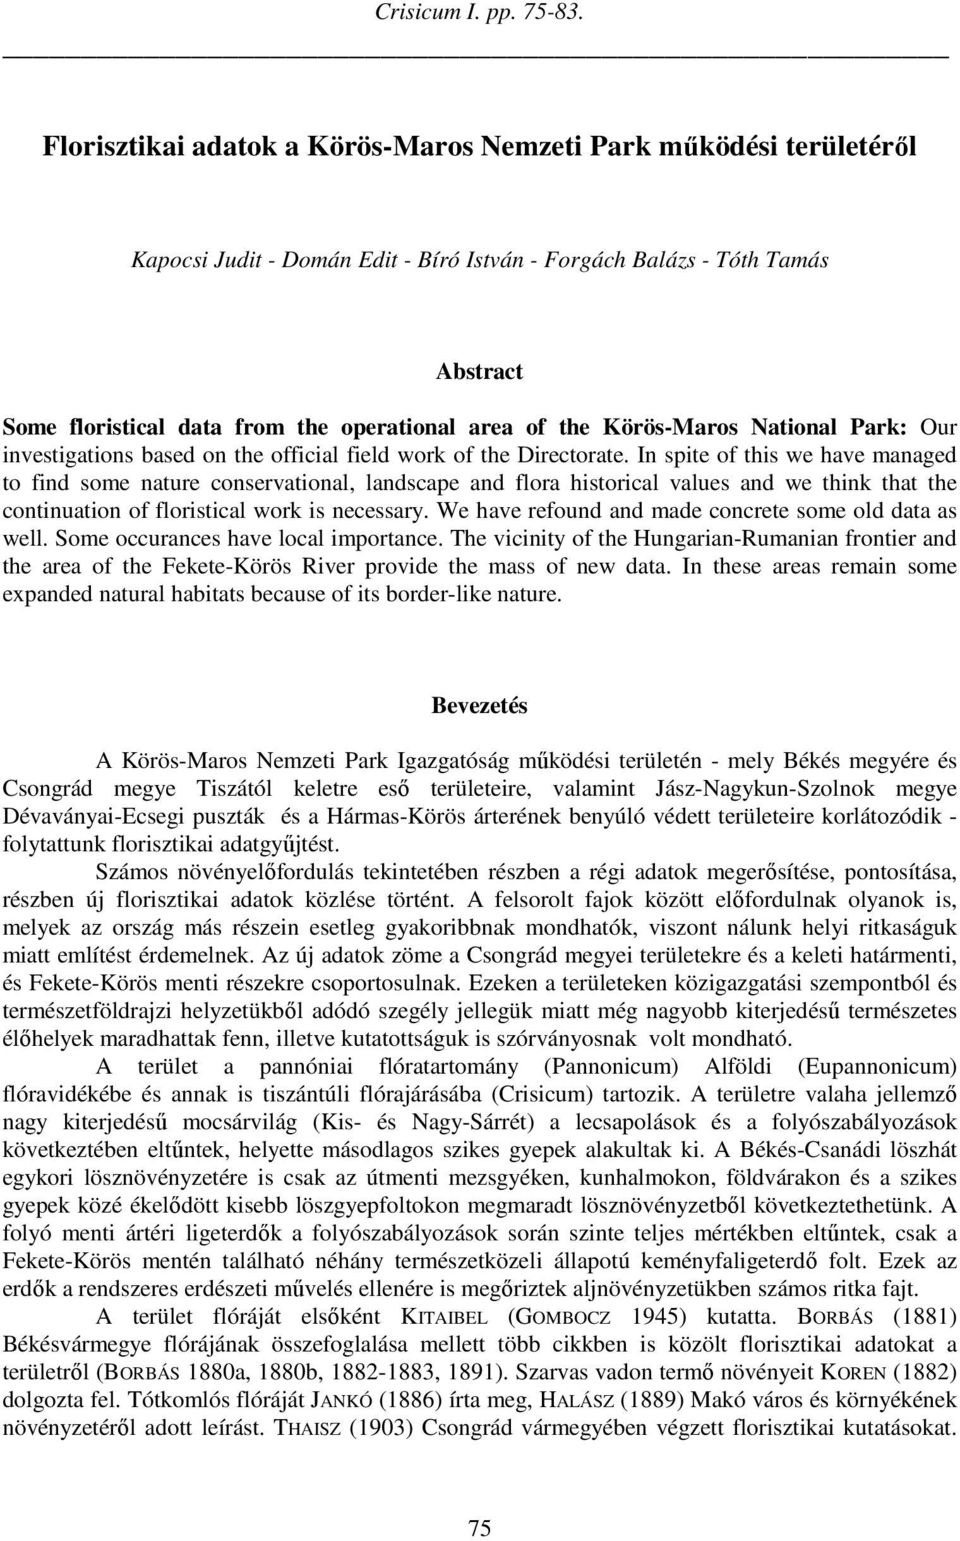 the Körös-Maros National Park: Our investigations based on the official field work of the Directorate.